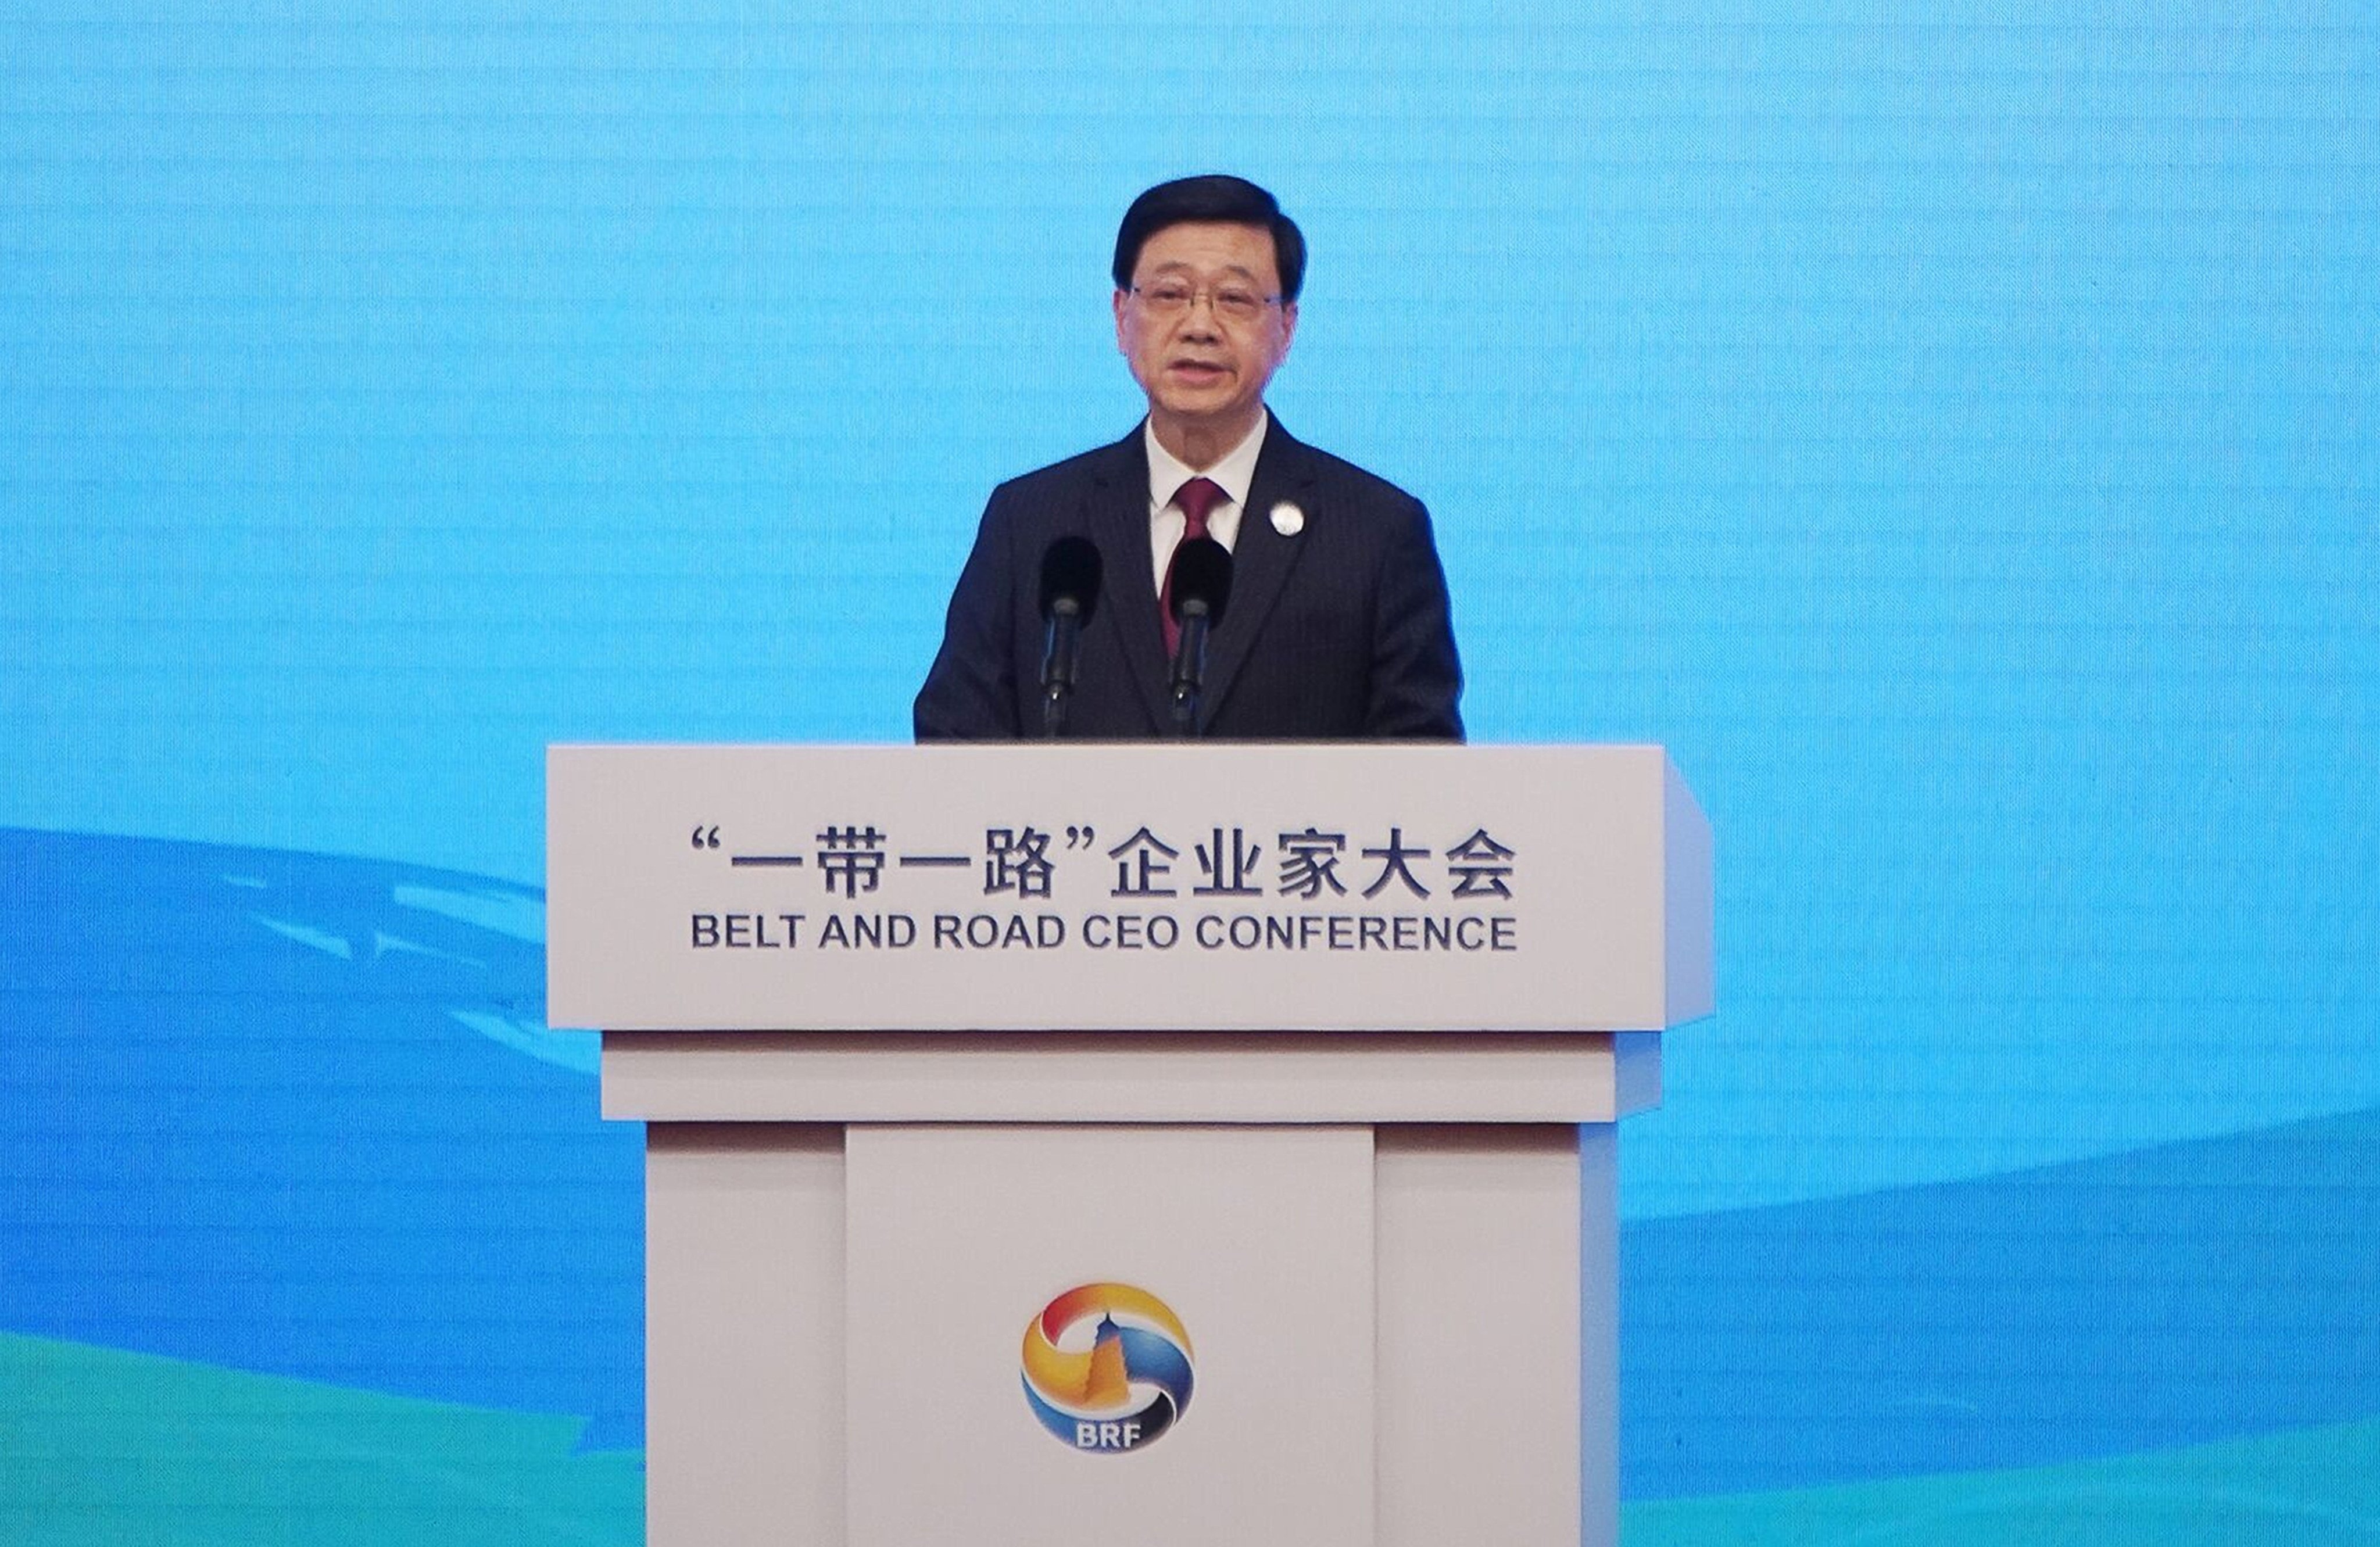 Hong Kong Chief Executive John Lee speaks at the Belt and Road CEO conference in Beijing on October 17. President Xi Jinping has called it the “project of the century”. Photo: Bloomberg